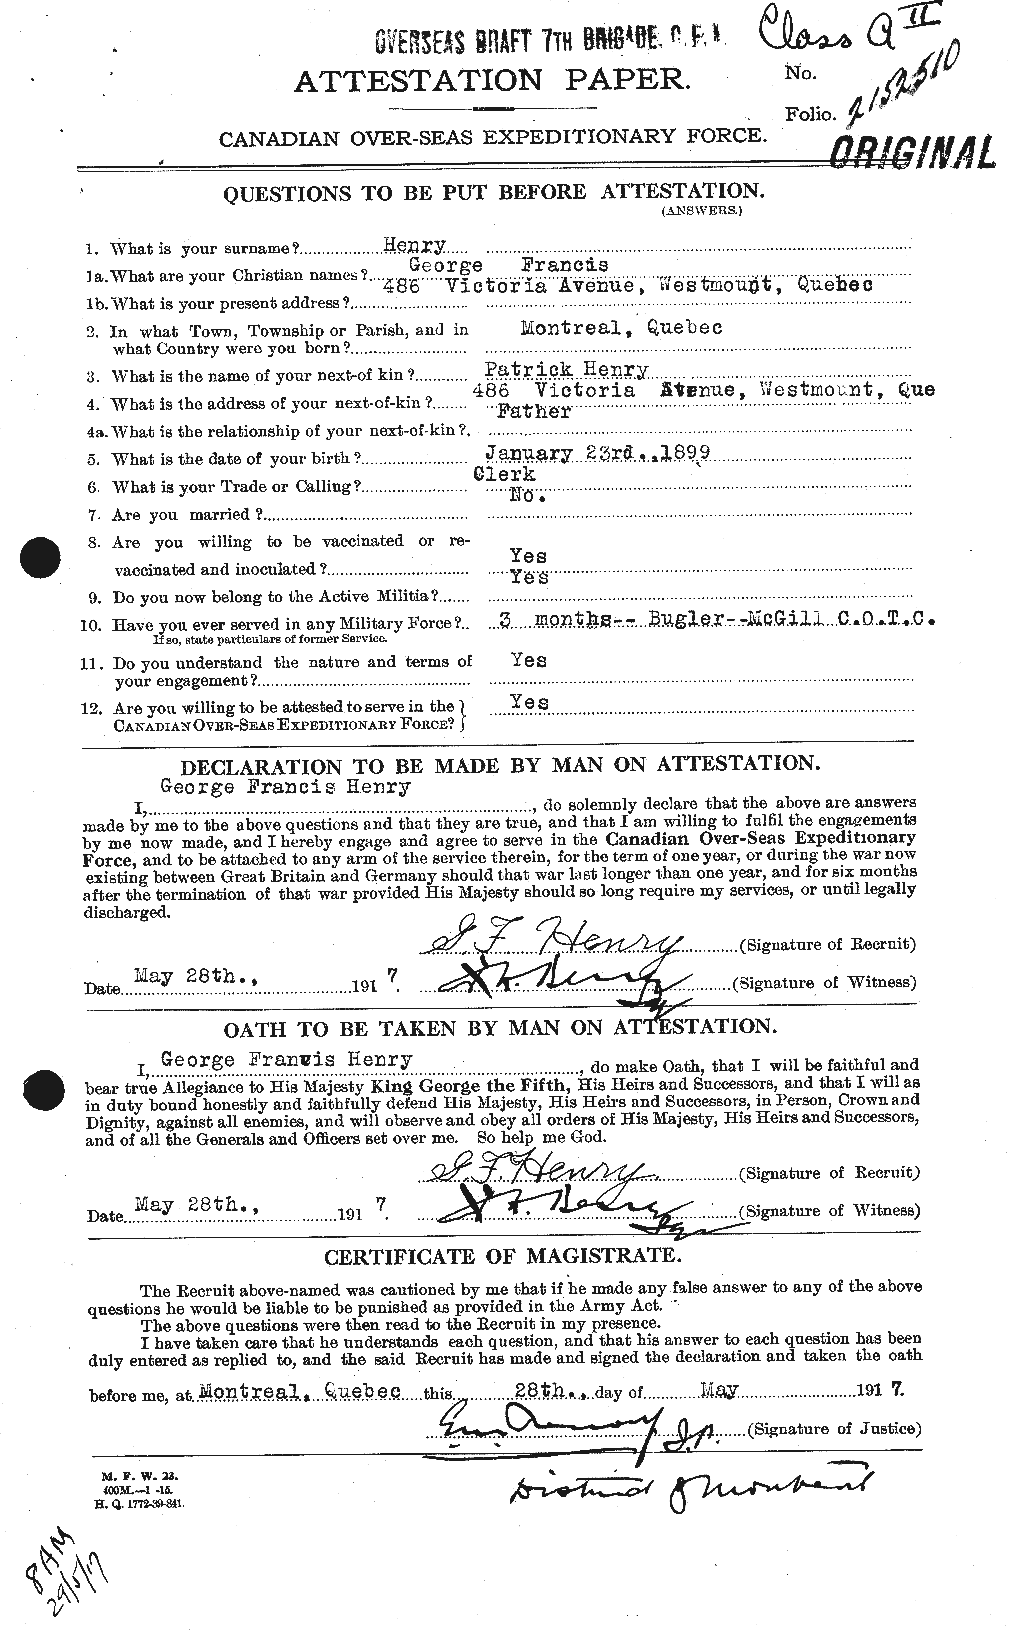 Personnel Records of the First World War - CEF 392874a